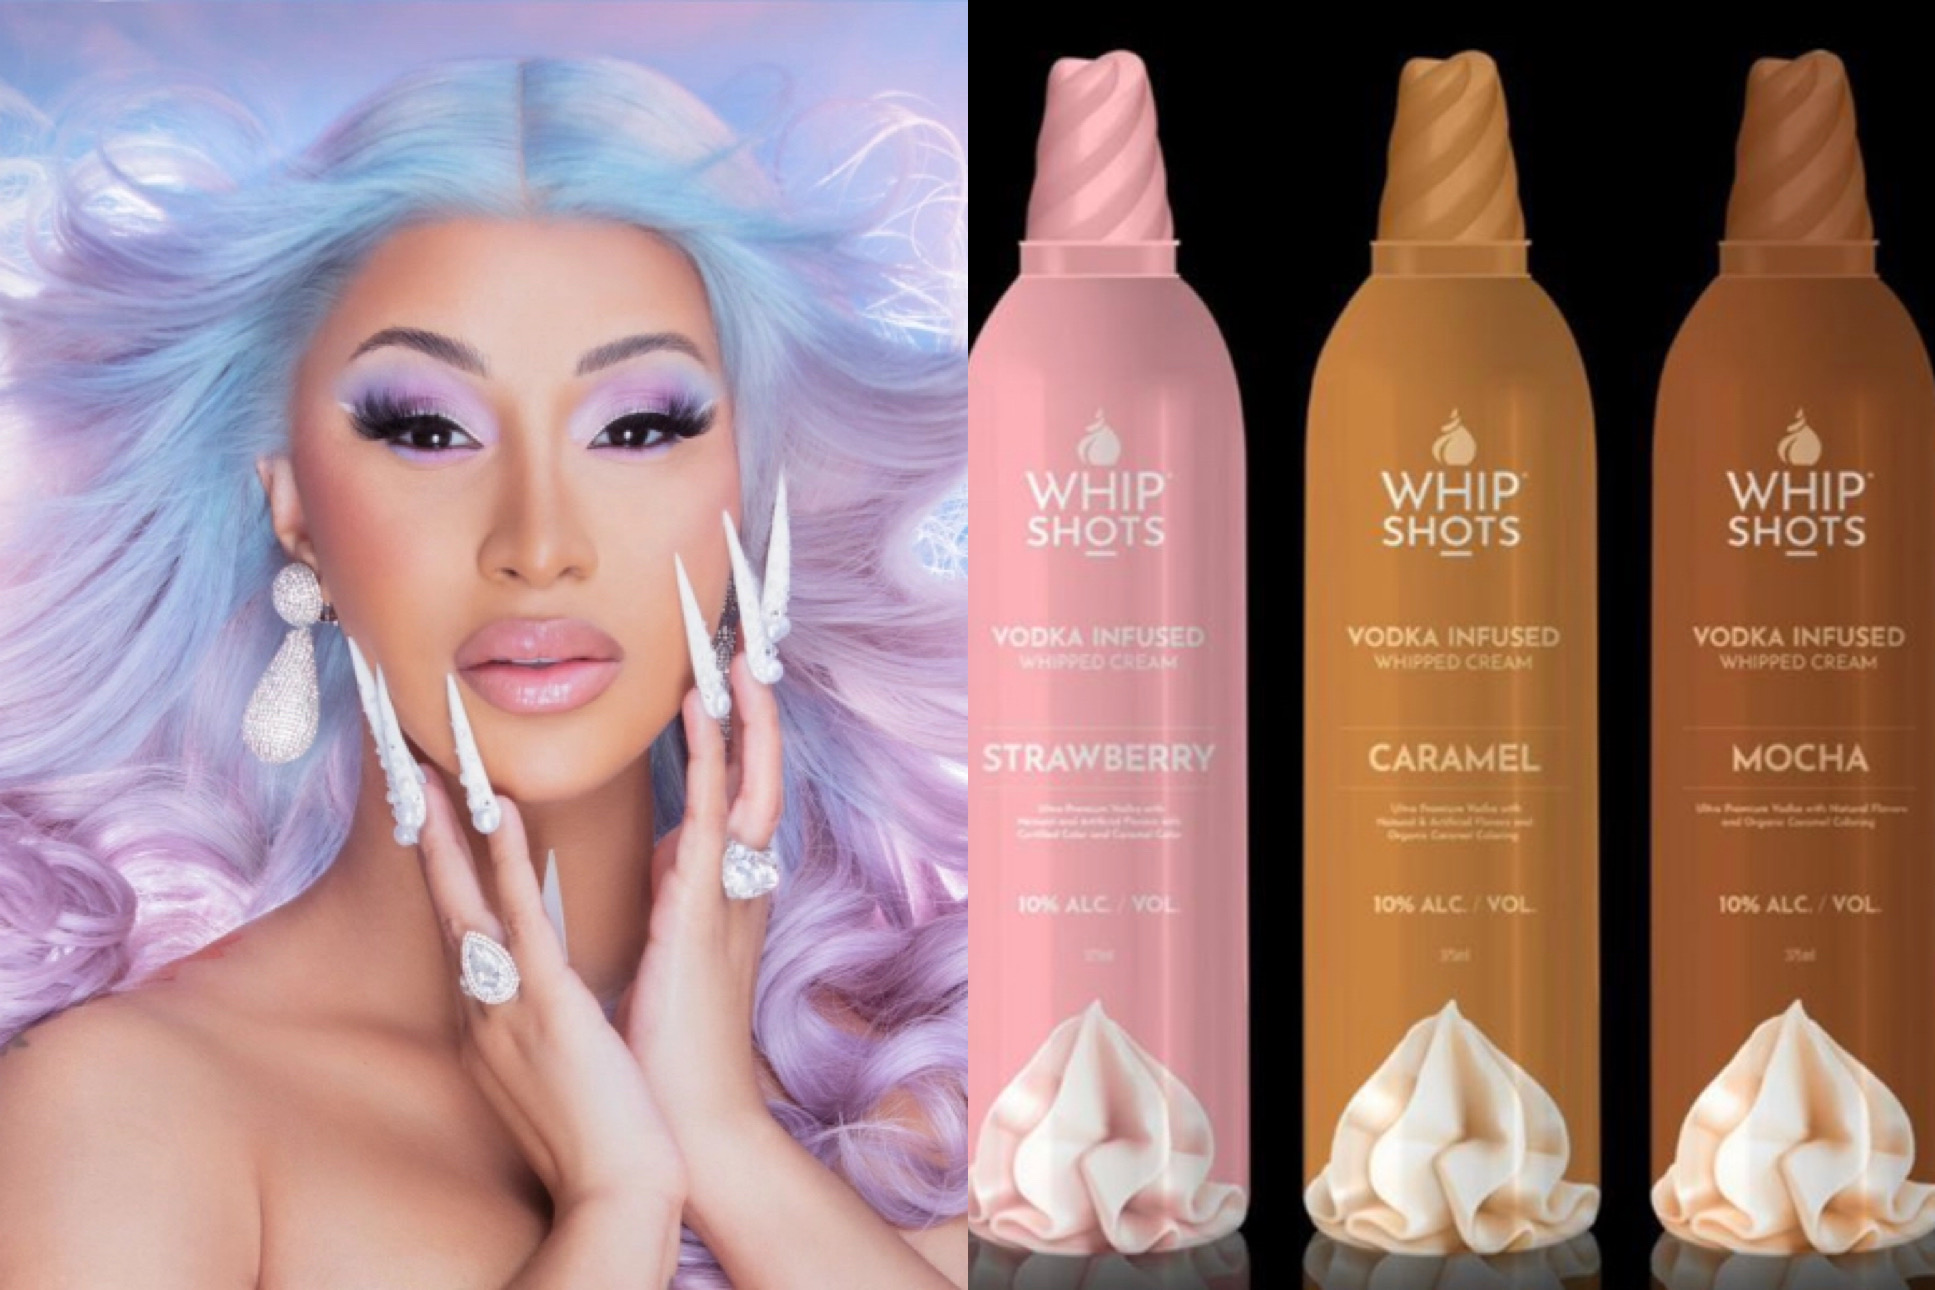 Money Moves Continued Cardi B Prepares Release Of New Liquor Infused Whipped Cream “whipshots